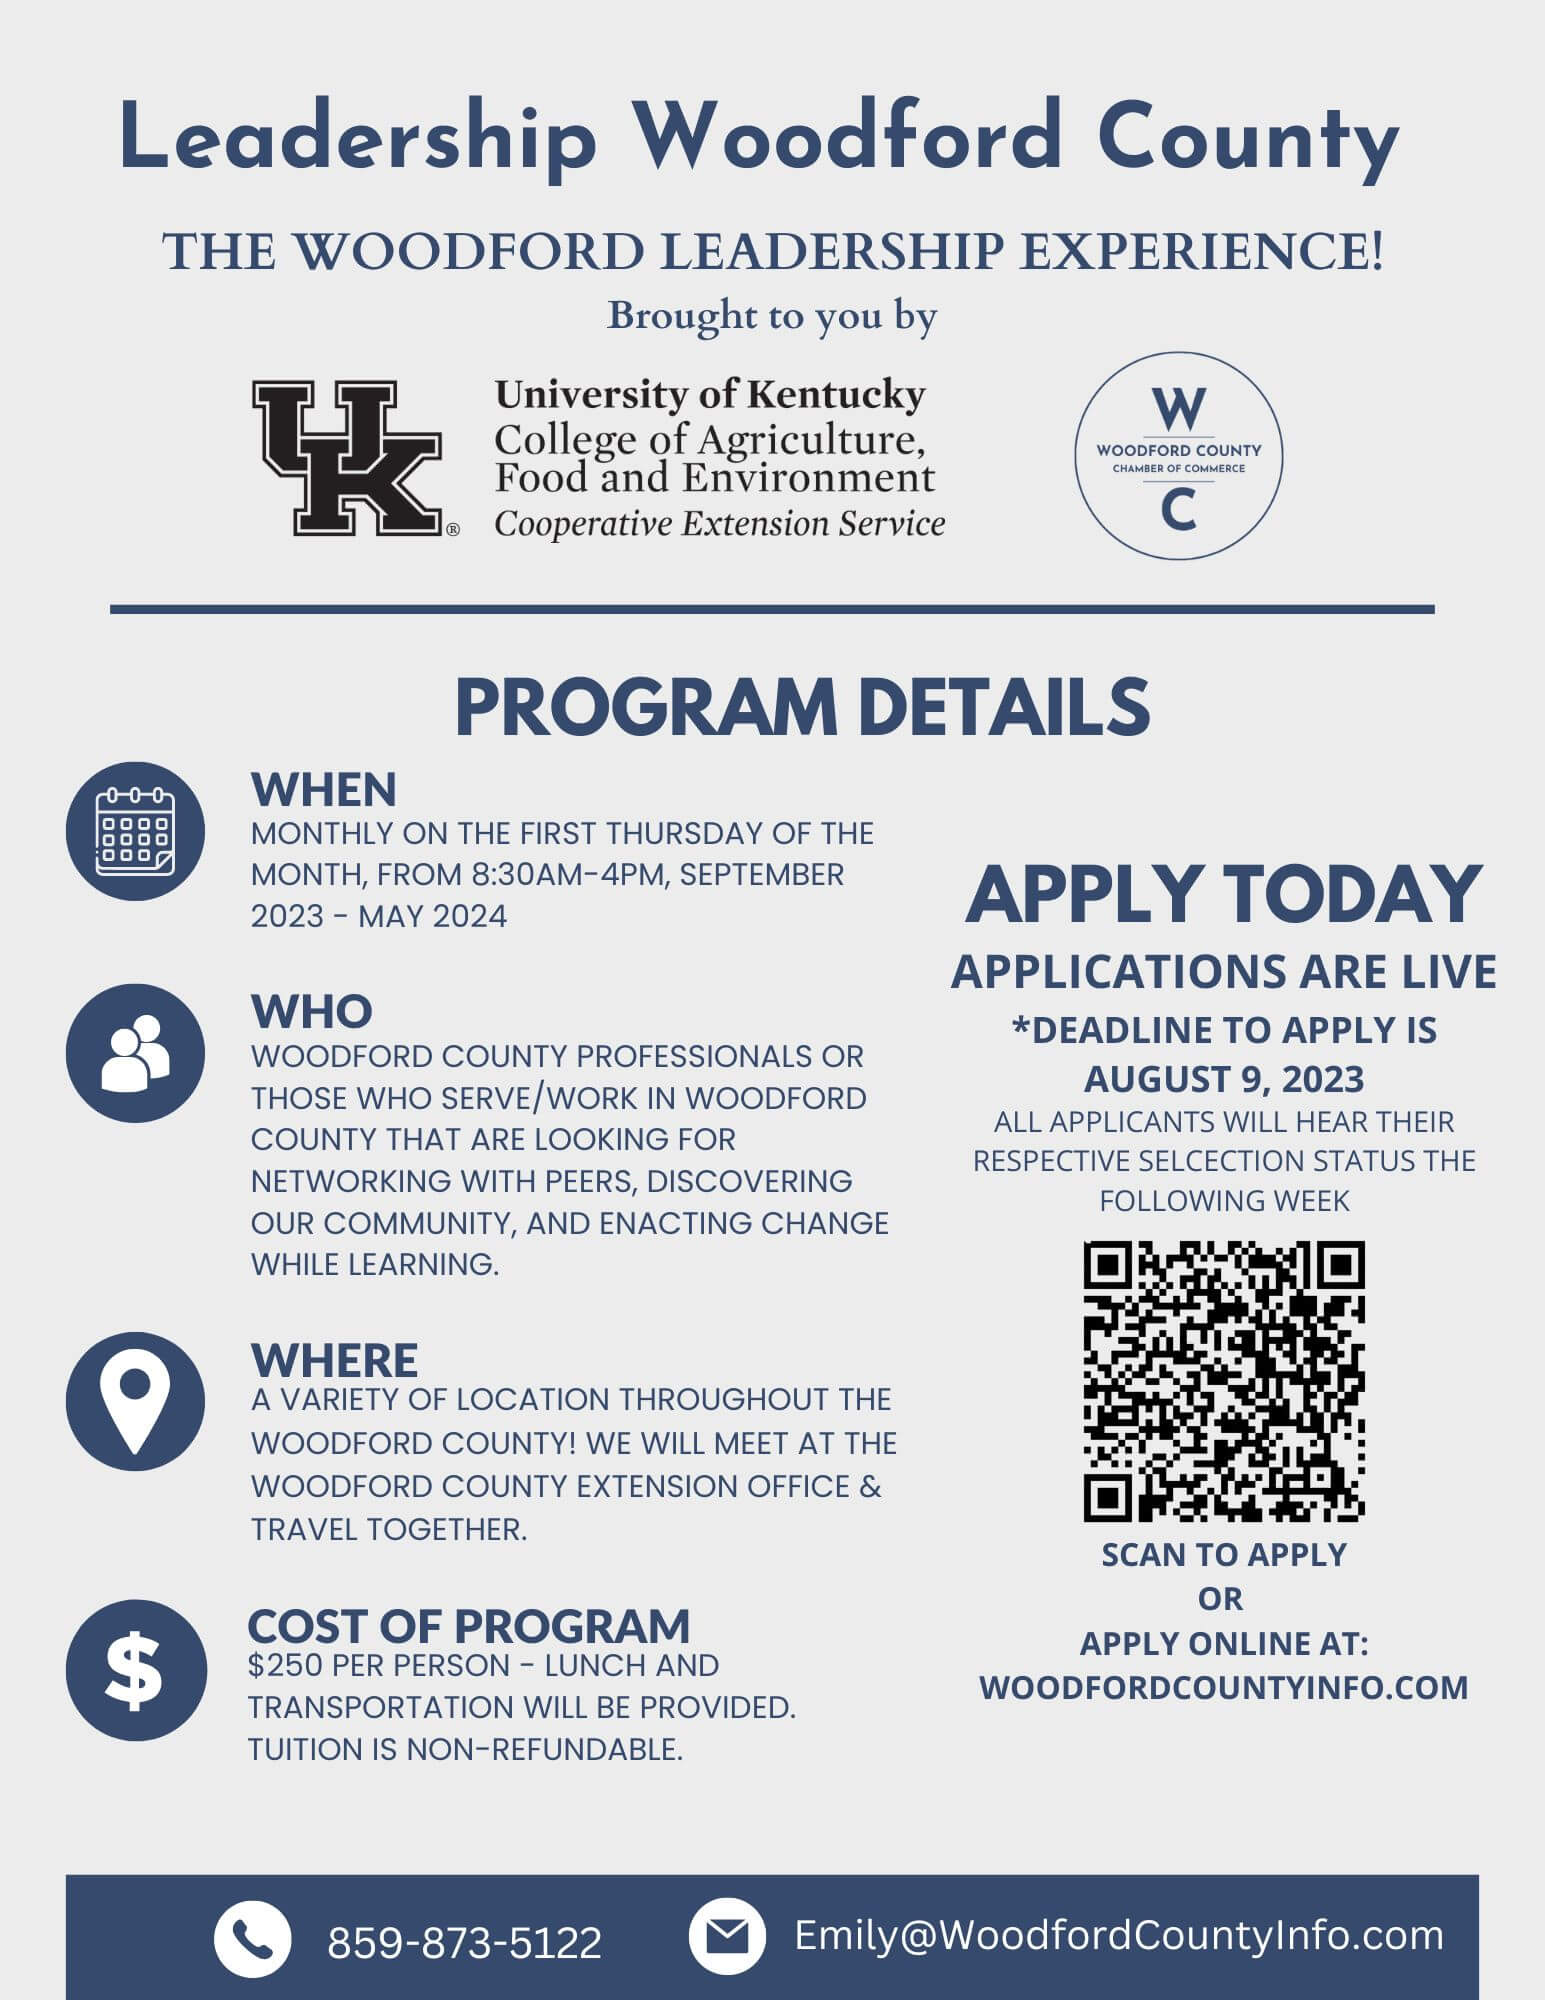 Leadership Woodford County Flyer, PG 1